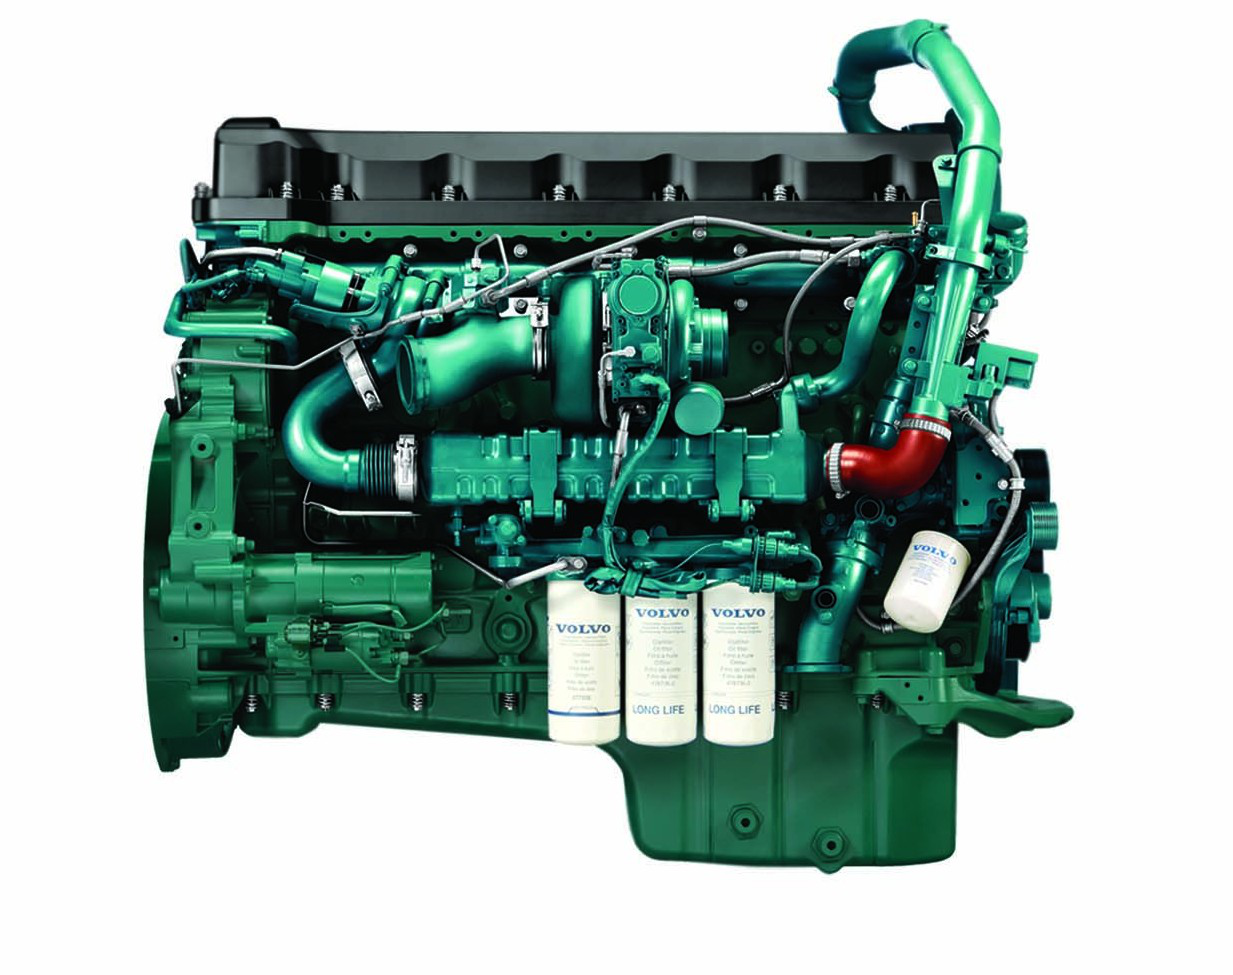 Volvo D13 Engine Commercial Carrier Journal.